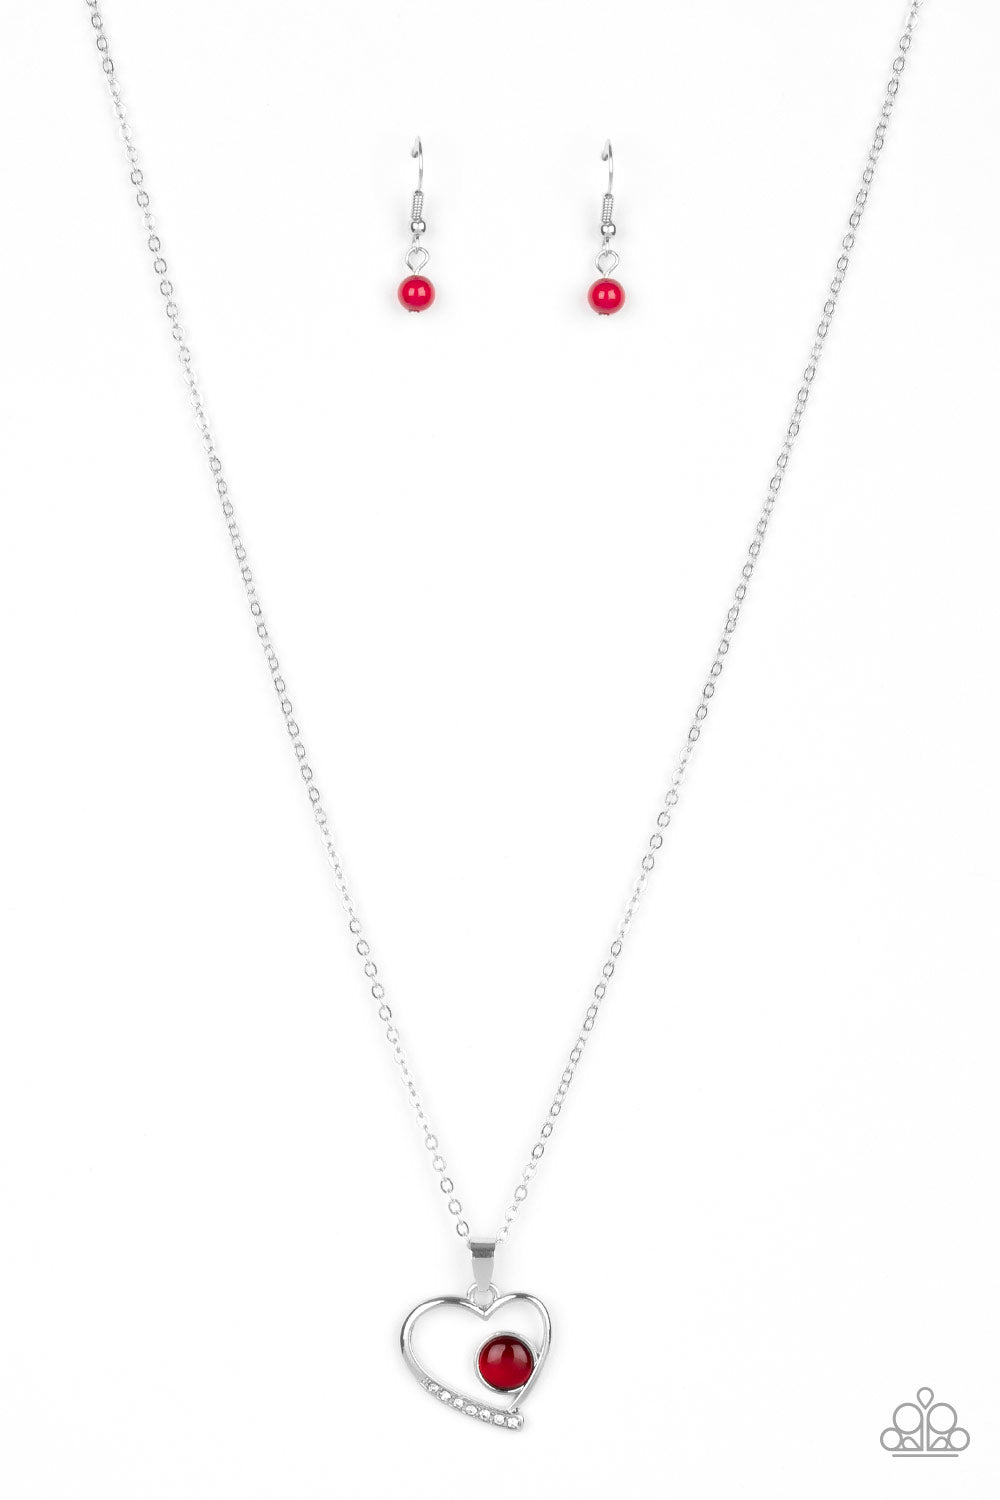 Heart Full of Love Red Paparazzi Necklaces Cashmere Pink Jewels - Cashmere Pink Jewels & Accessories, Cashmere Pink Jewels & Accessories - Paparazzi